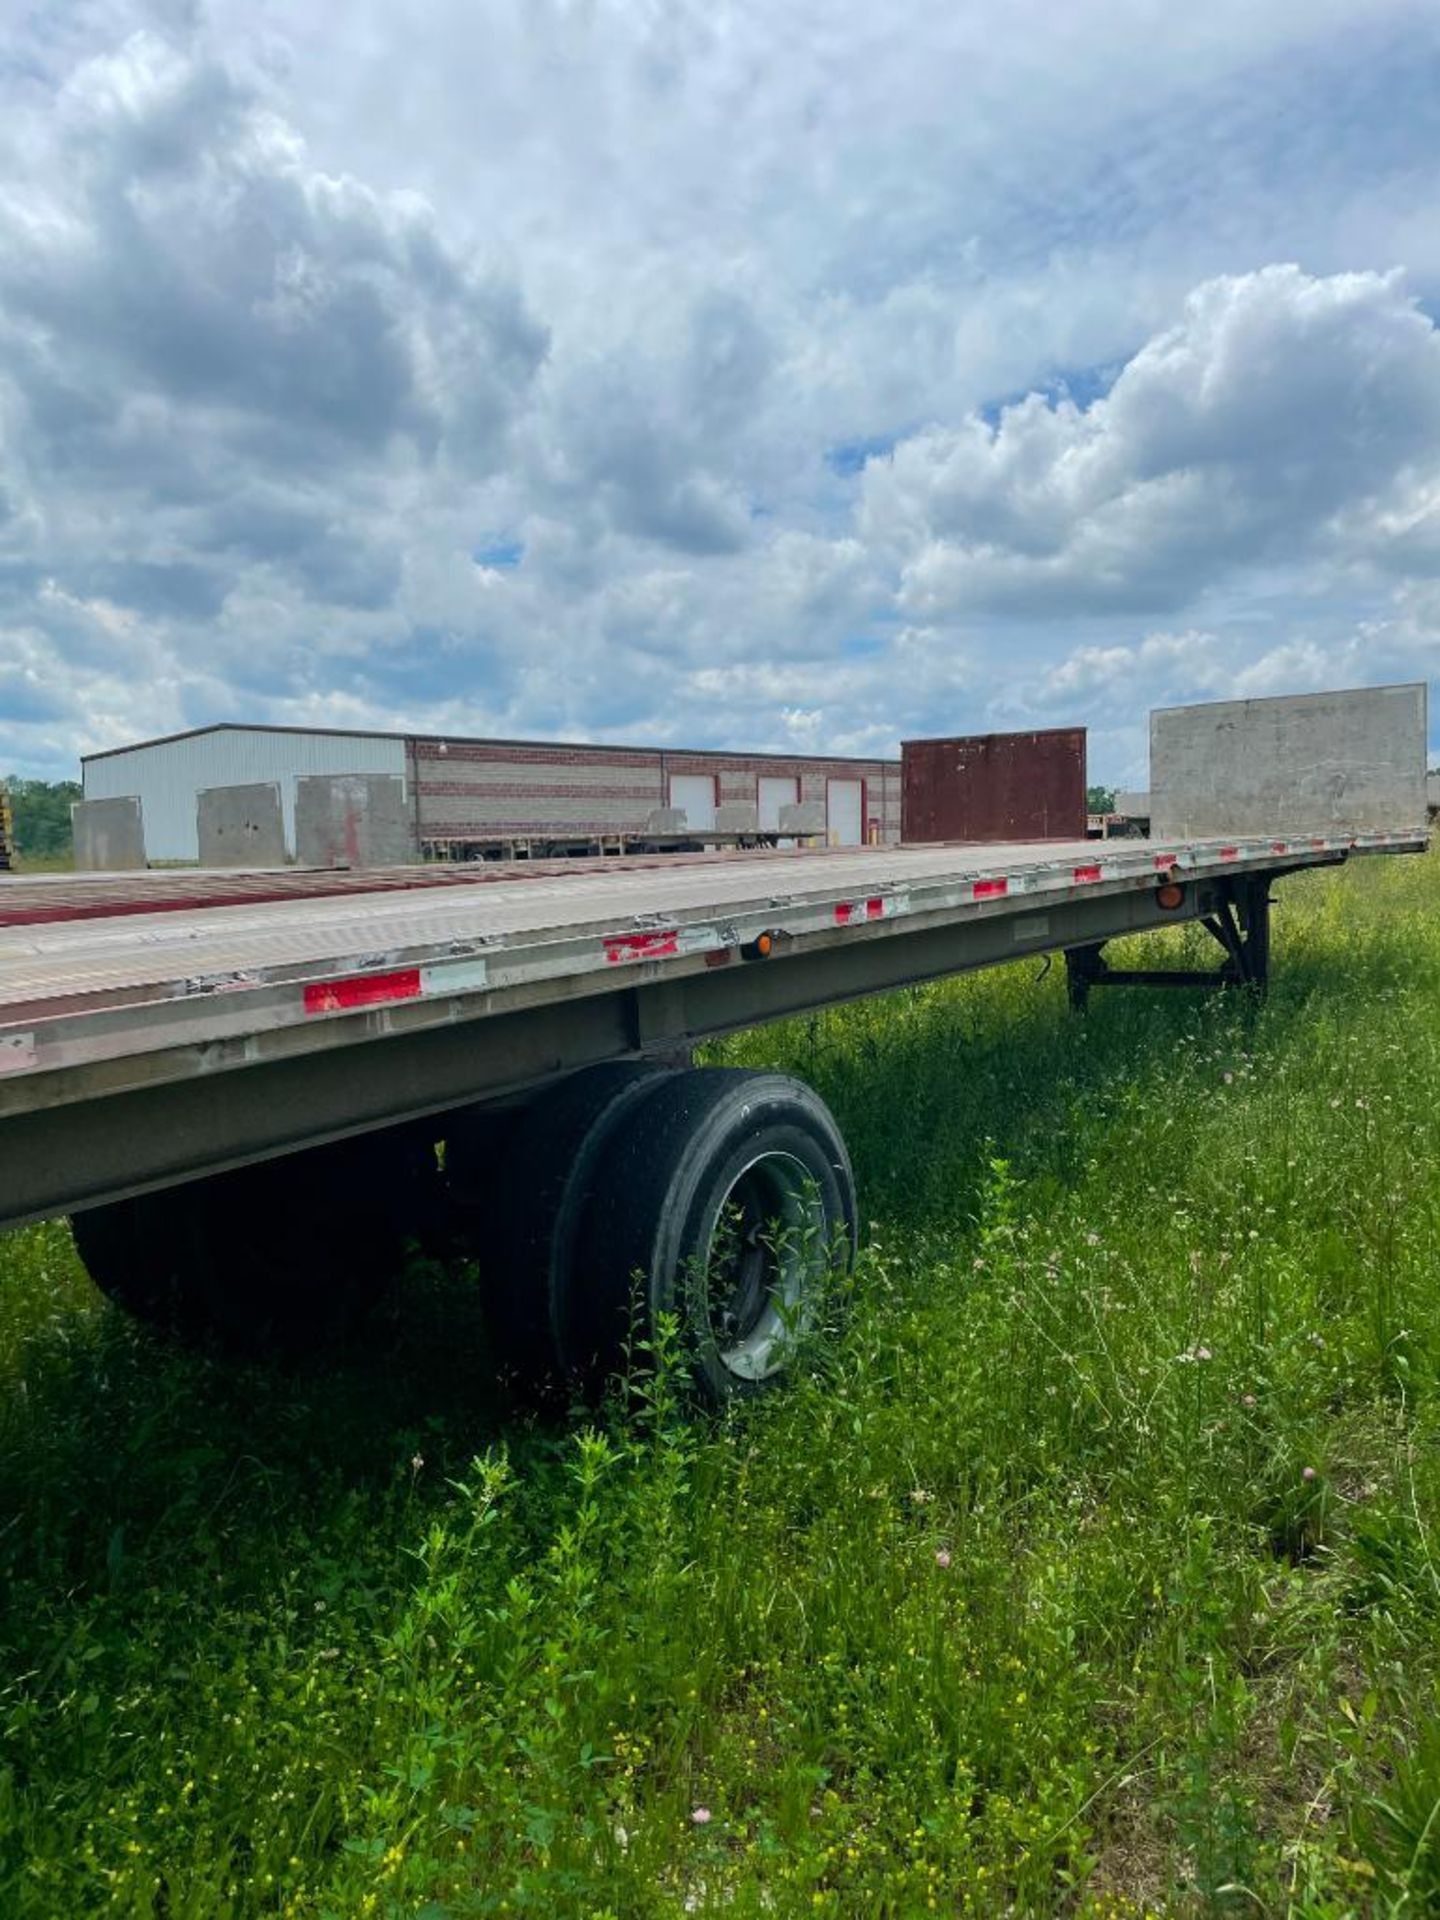 1986 RAVENS 45' ALUMINUM FLATBED TRAILER, DUAL TANDEM SPREAD AXLE, MODEL 54555, WITH HEADACHE - Image 2 of 3